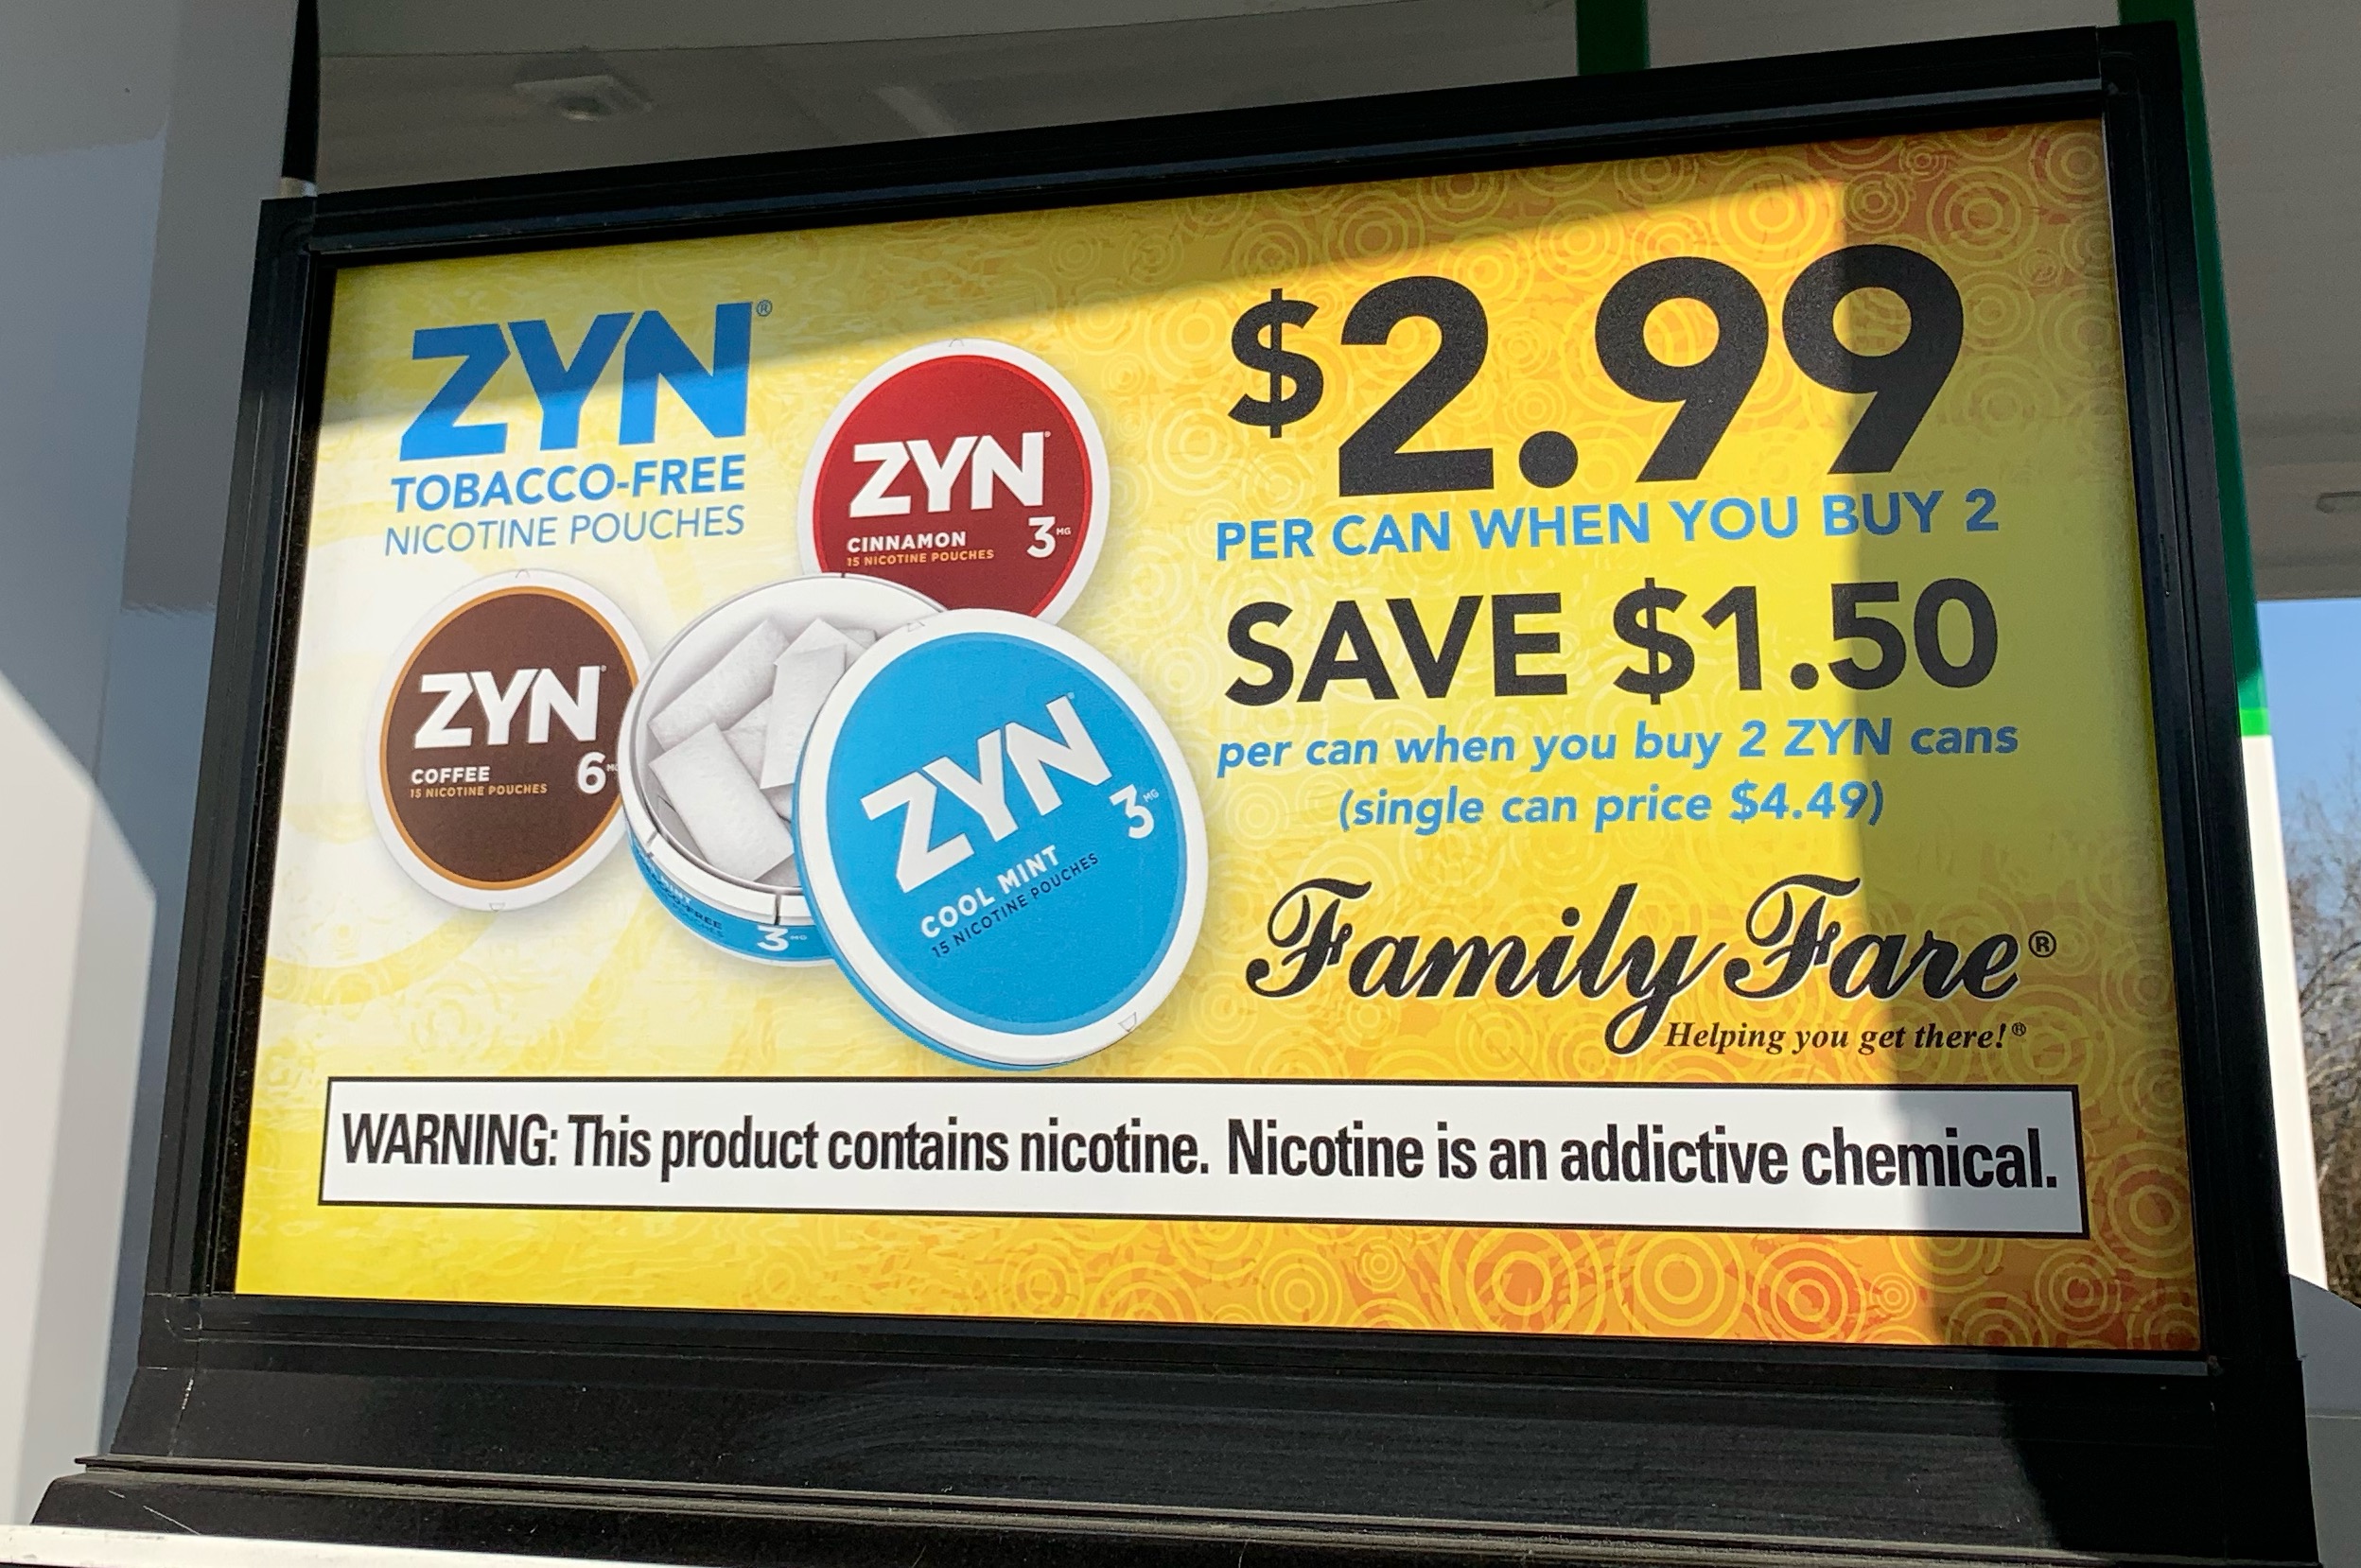 Ad for Zyn oral nicotine pouches